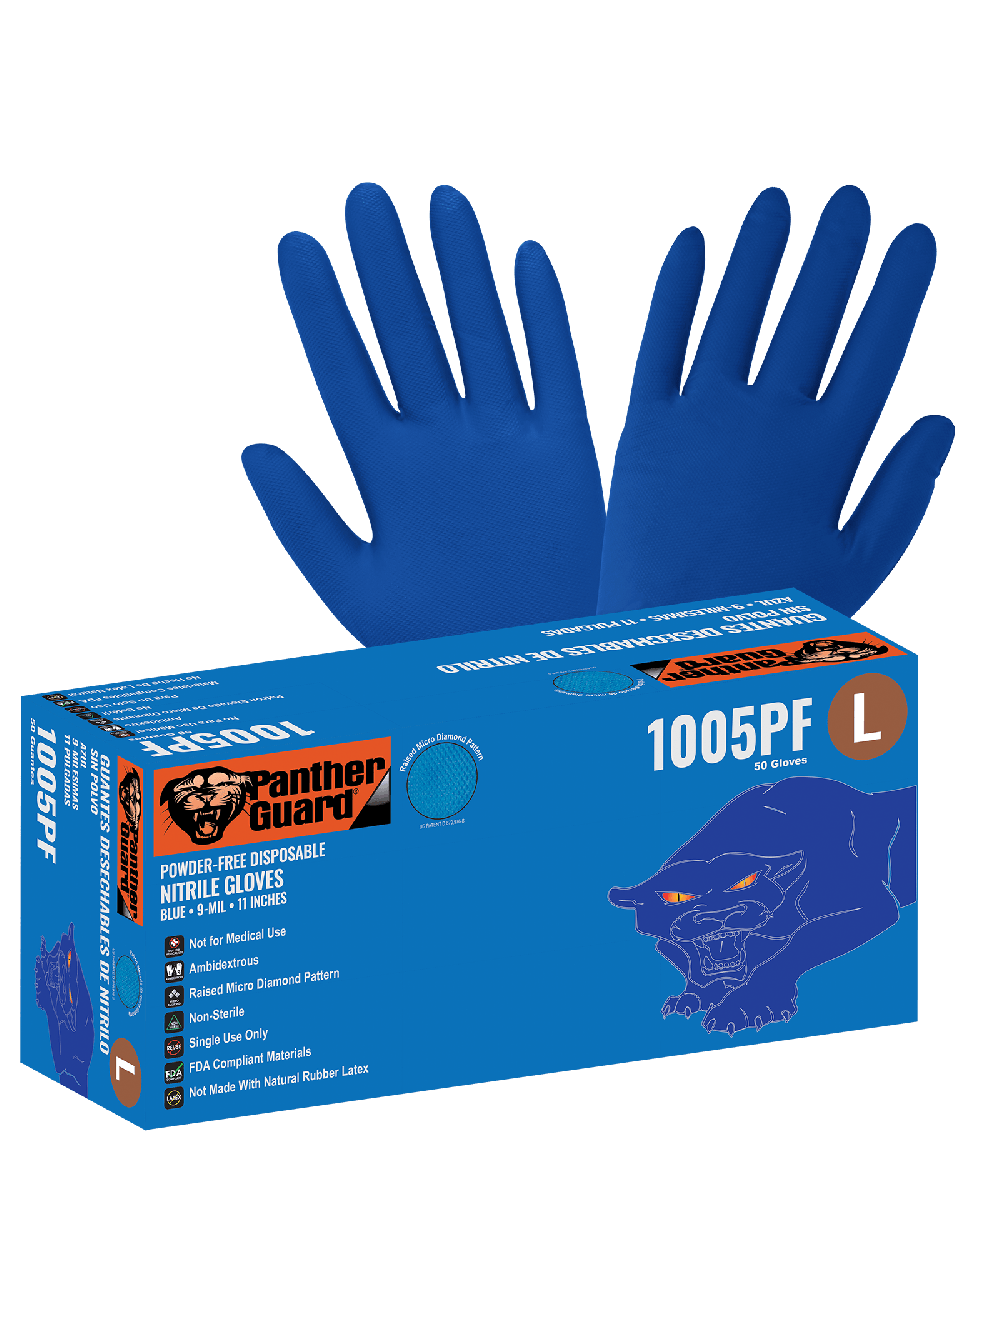 Introducing Global Glove 1005PF Panther-Guard® Heavyweight Nitrile Gloves